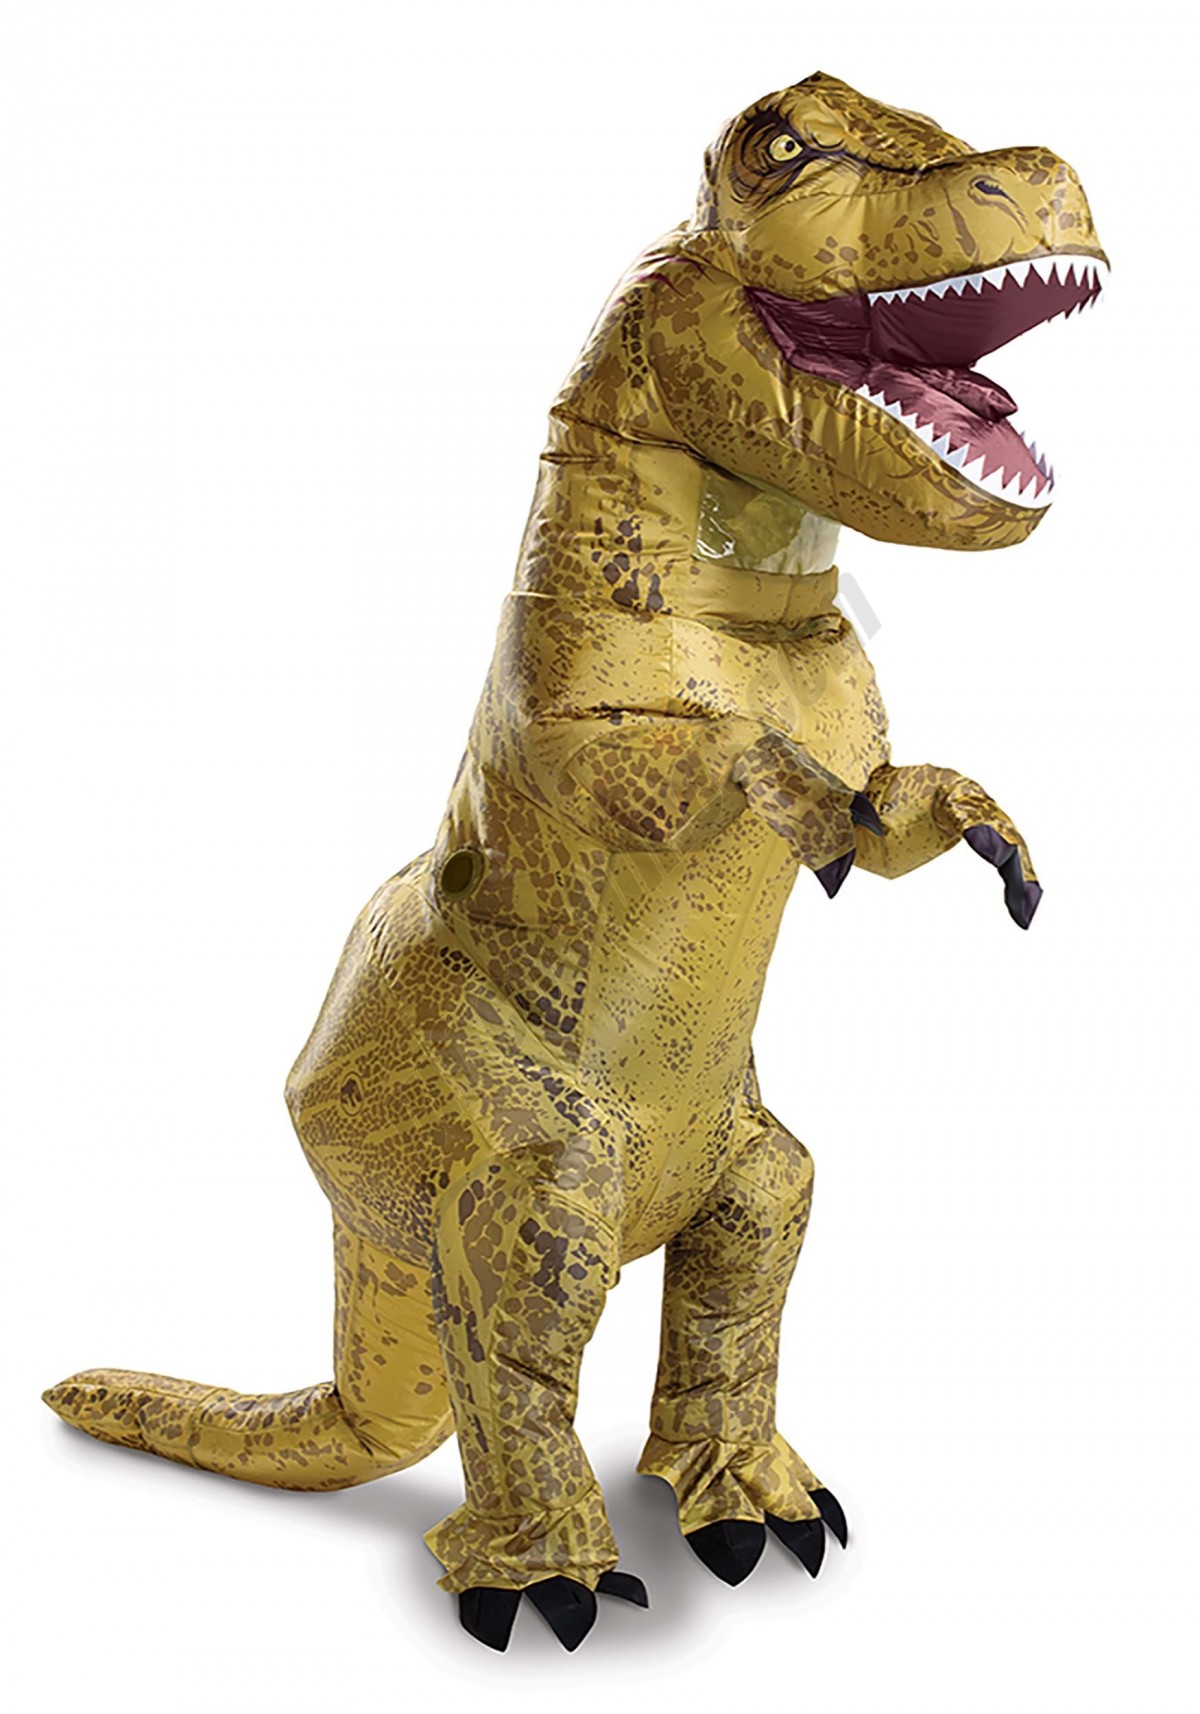 Jurassic World Inflatable T-Rex Costume for Adults - Men's - -0